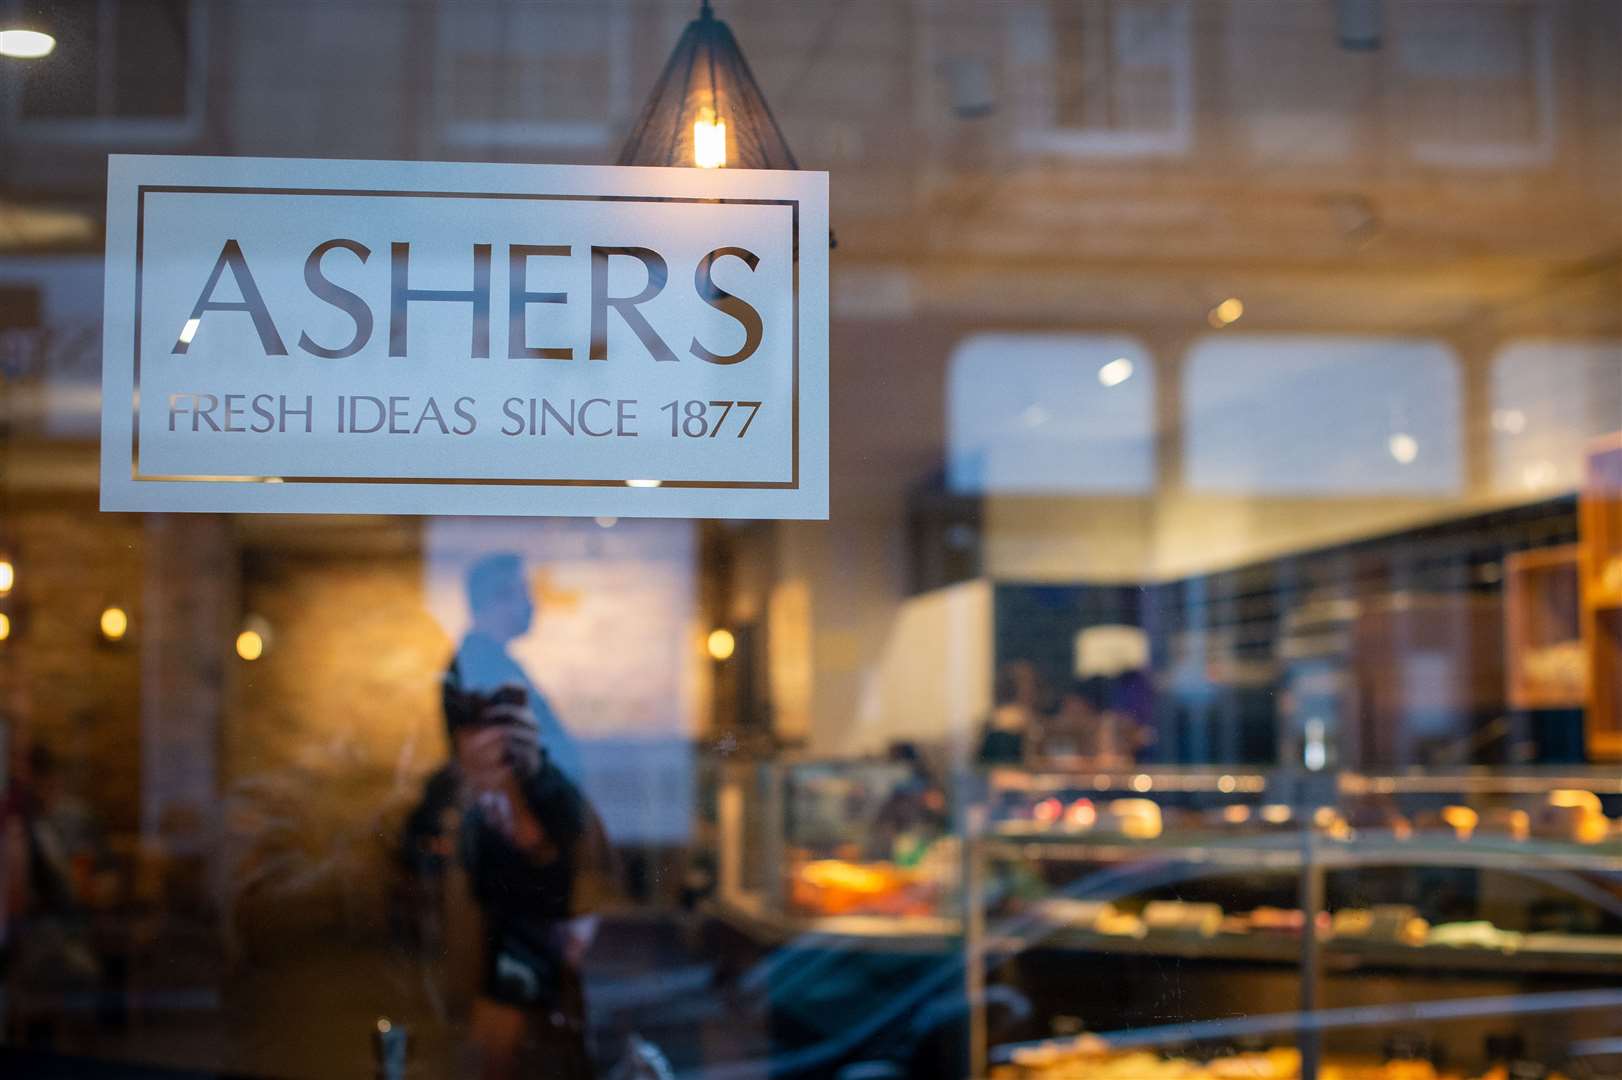 Ashers has won top awards for a range of its products.